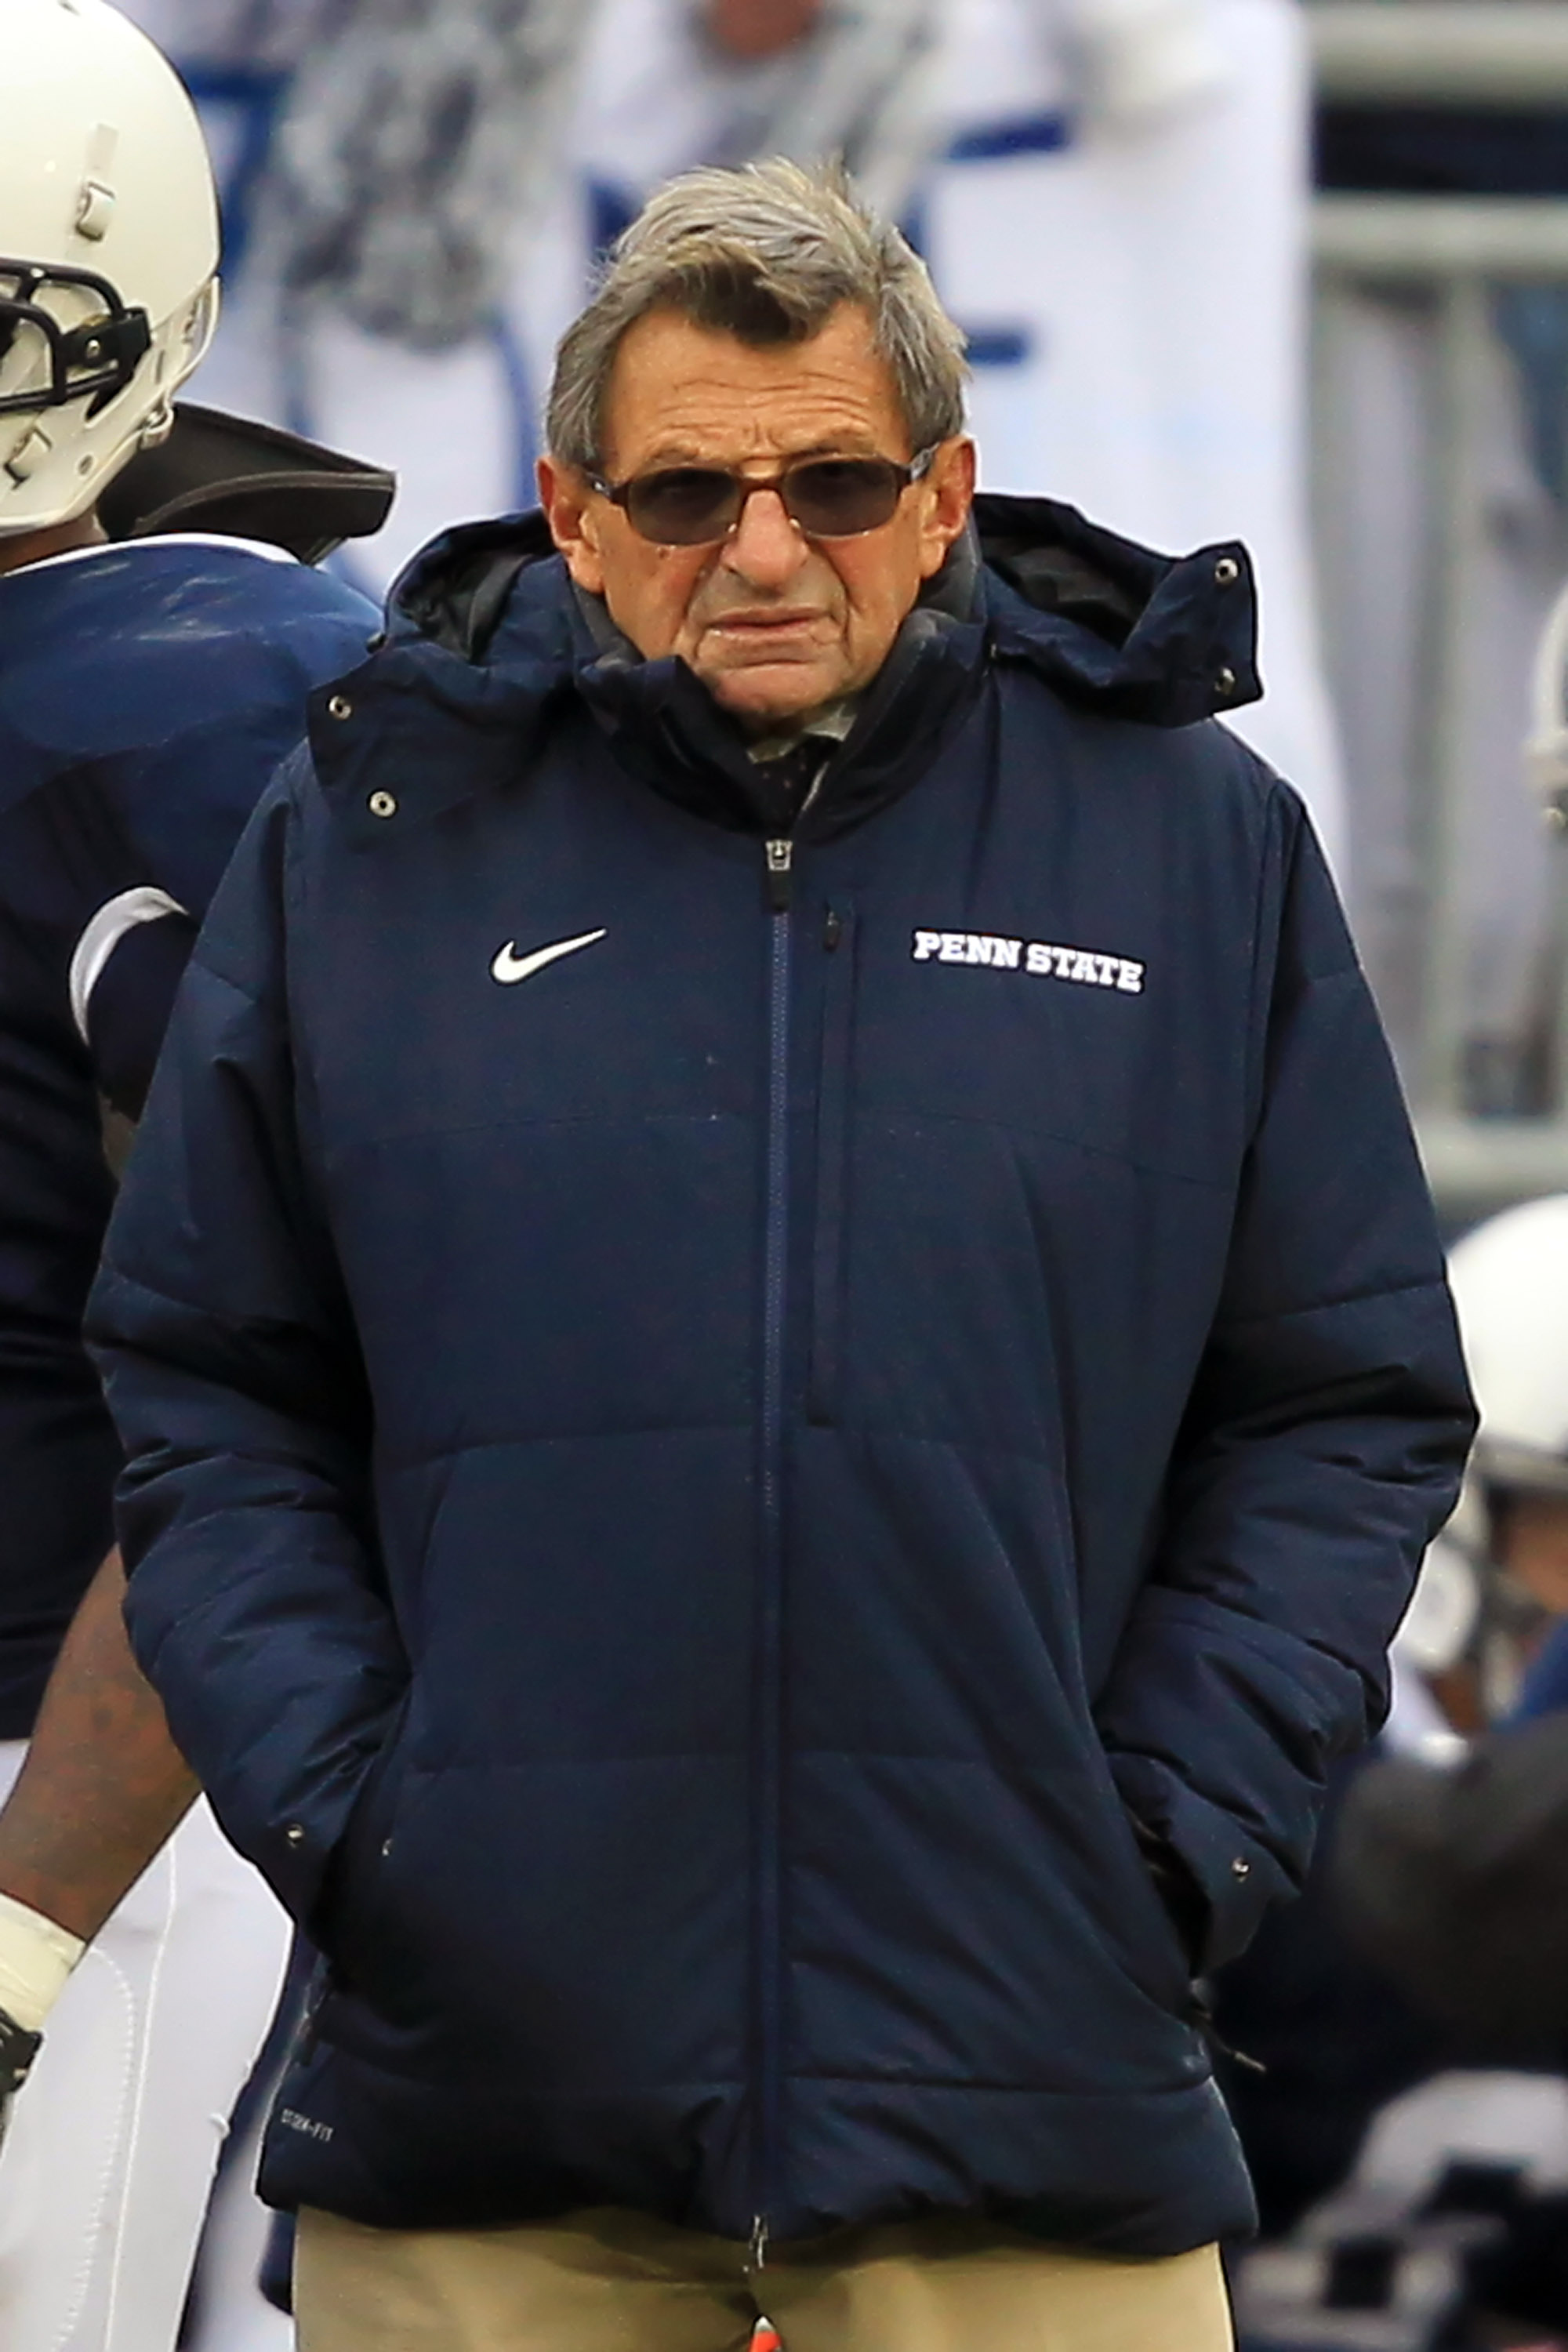 STATE COLLEGE, PA - NOVEMBER 27: Head coach Joe Paterno of the Penn State Nittany Lions stands on the sideline during a game against the Michigan State Spartans on November 27, 2010 at Beaver Stadium in State College, Pennsylvania. The Spartans won 28-22.